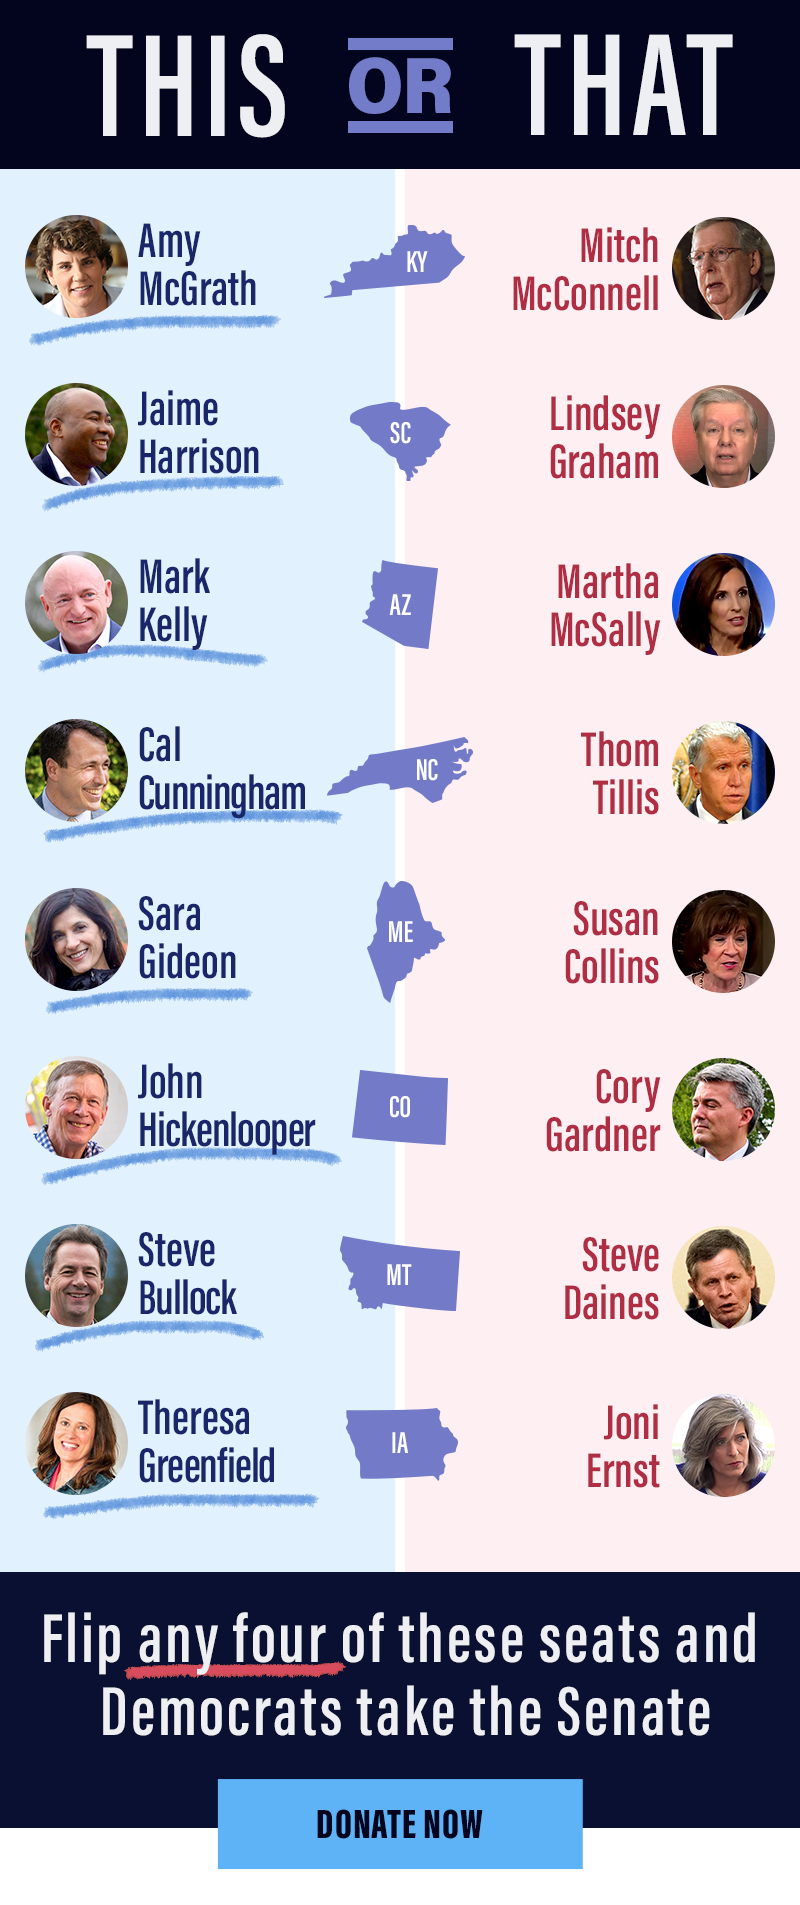 McGrath or McConnell? Kelly or McSally? Bullock or Daines? 